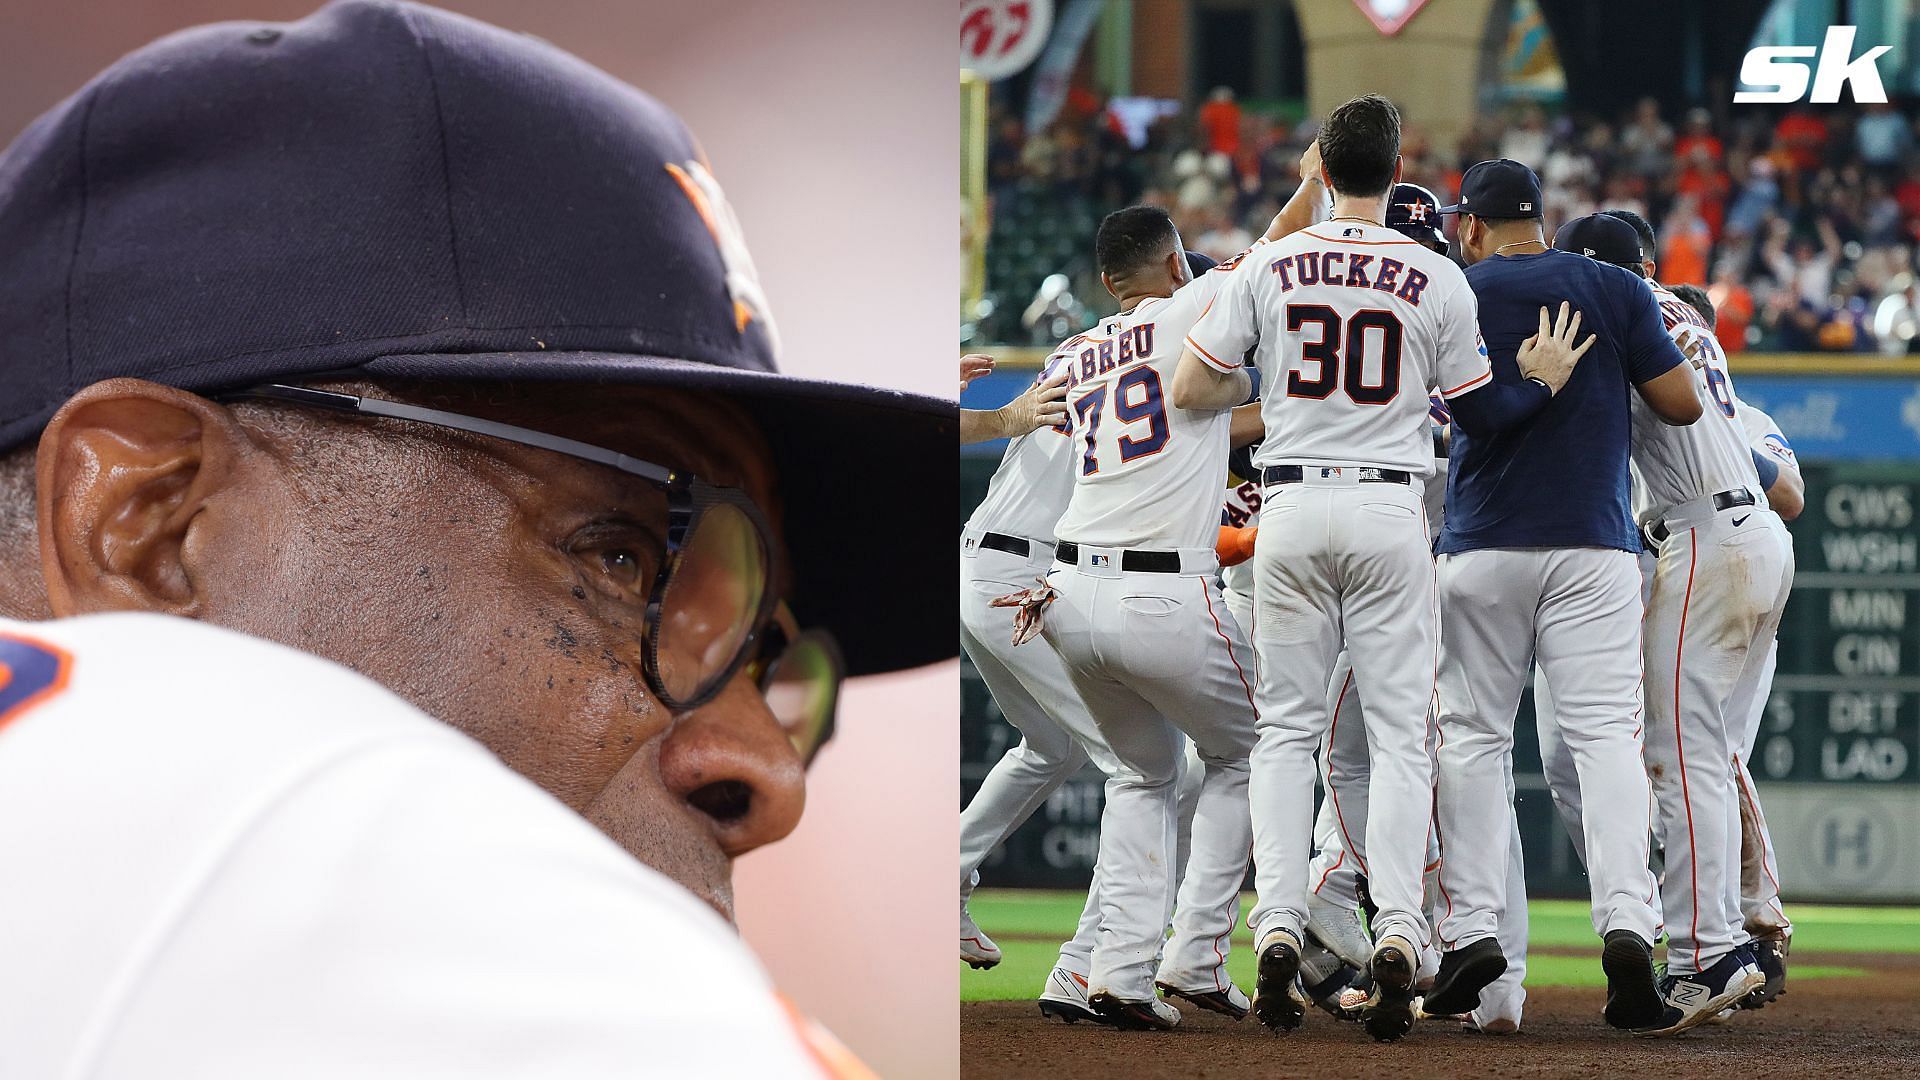 Dusty Baker's wife thrilled over Astros' World Series win